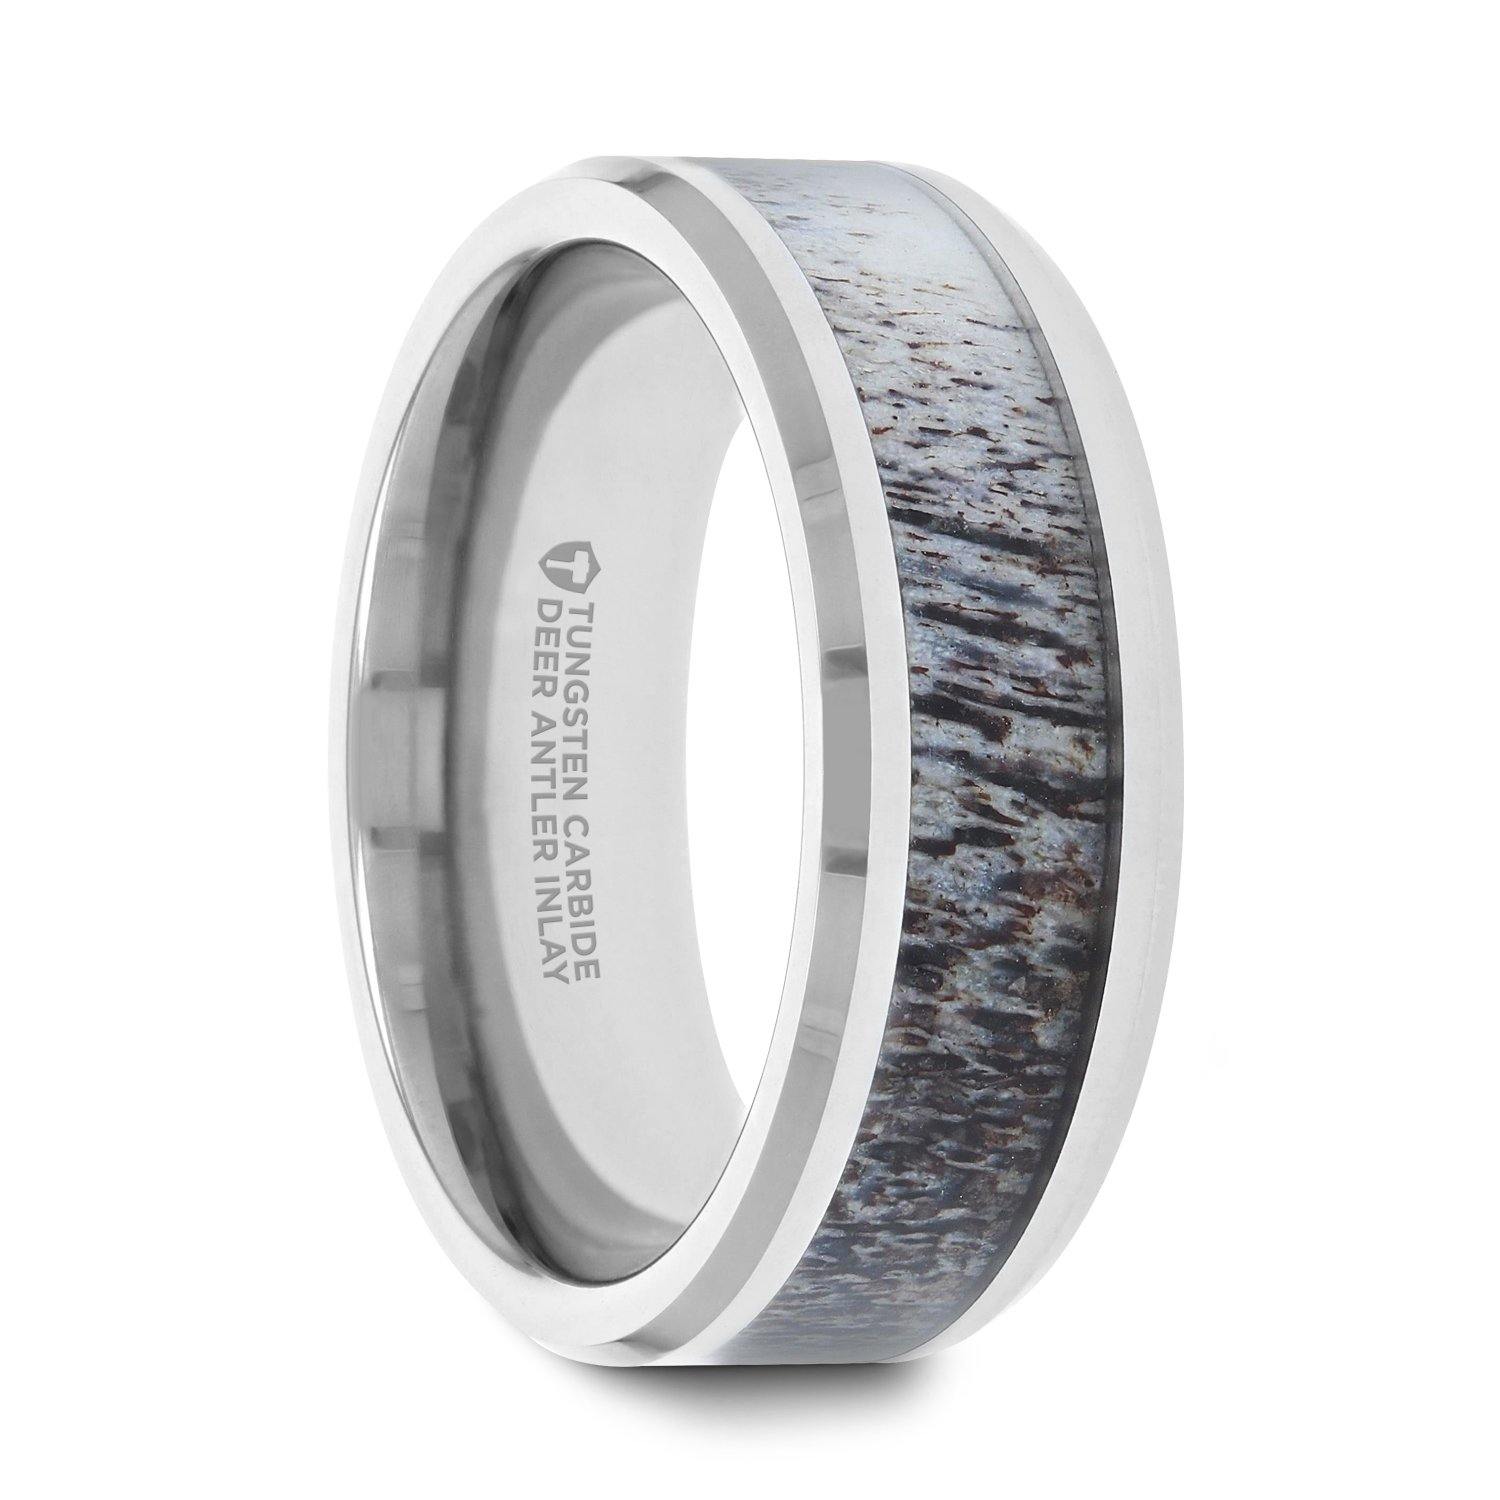 BUCK - Ombre Deer Antler and Tungsten Carbide Ring - 6mm & 8mm - The Rutile Ltd